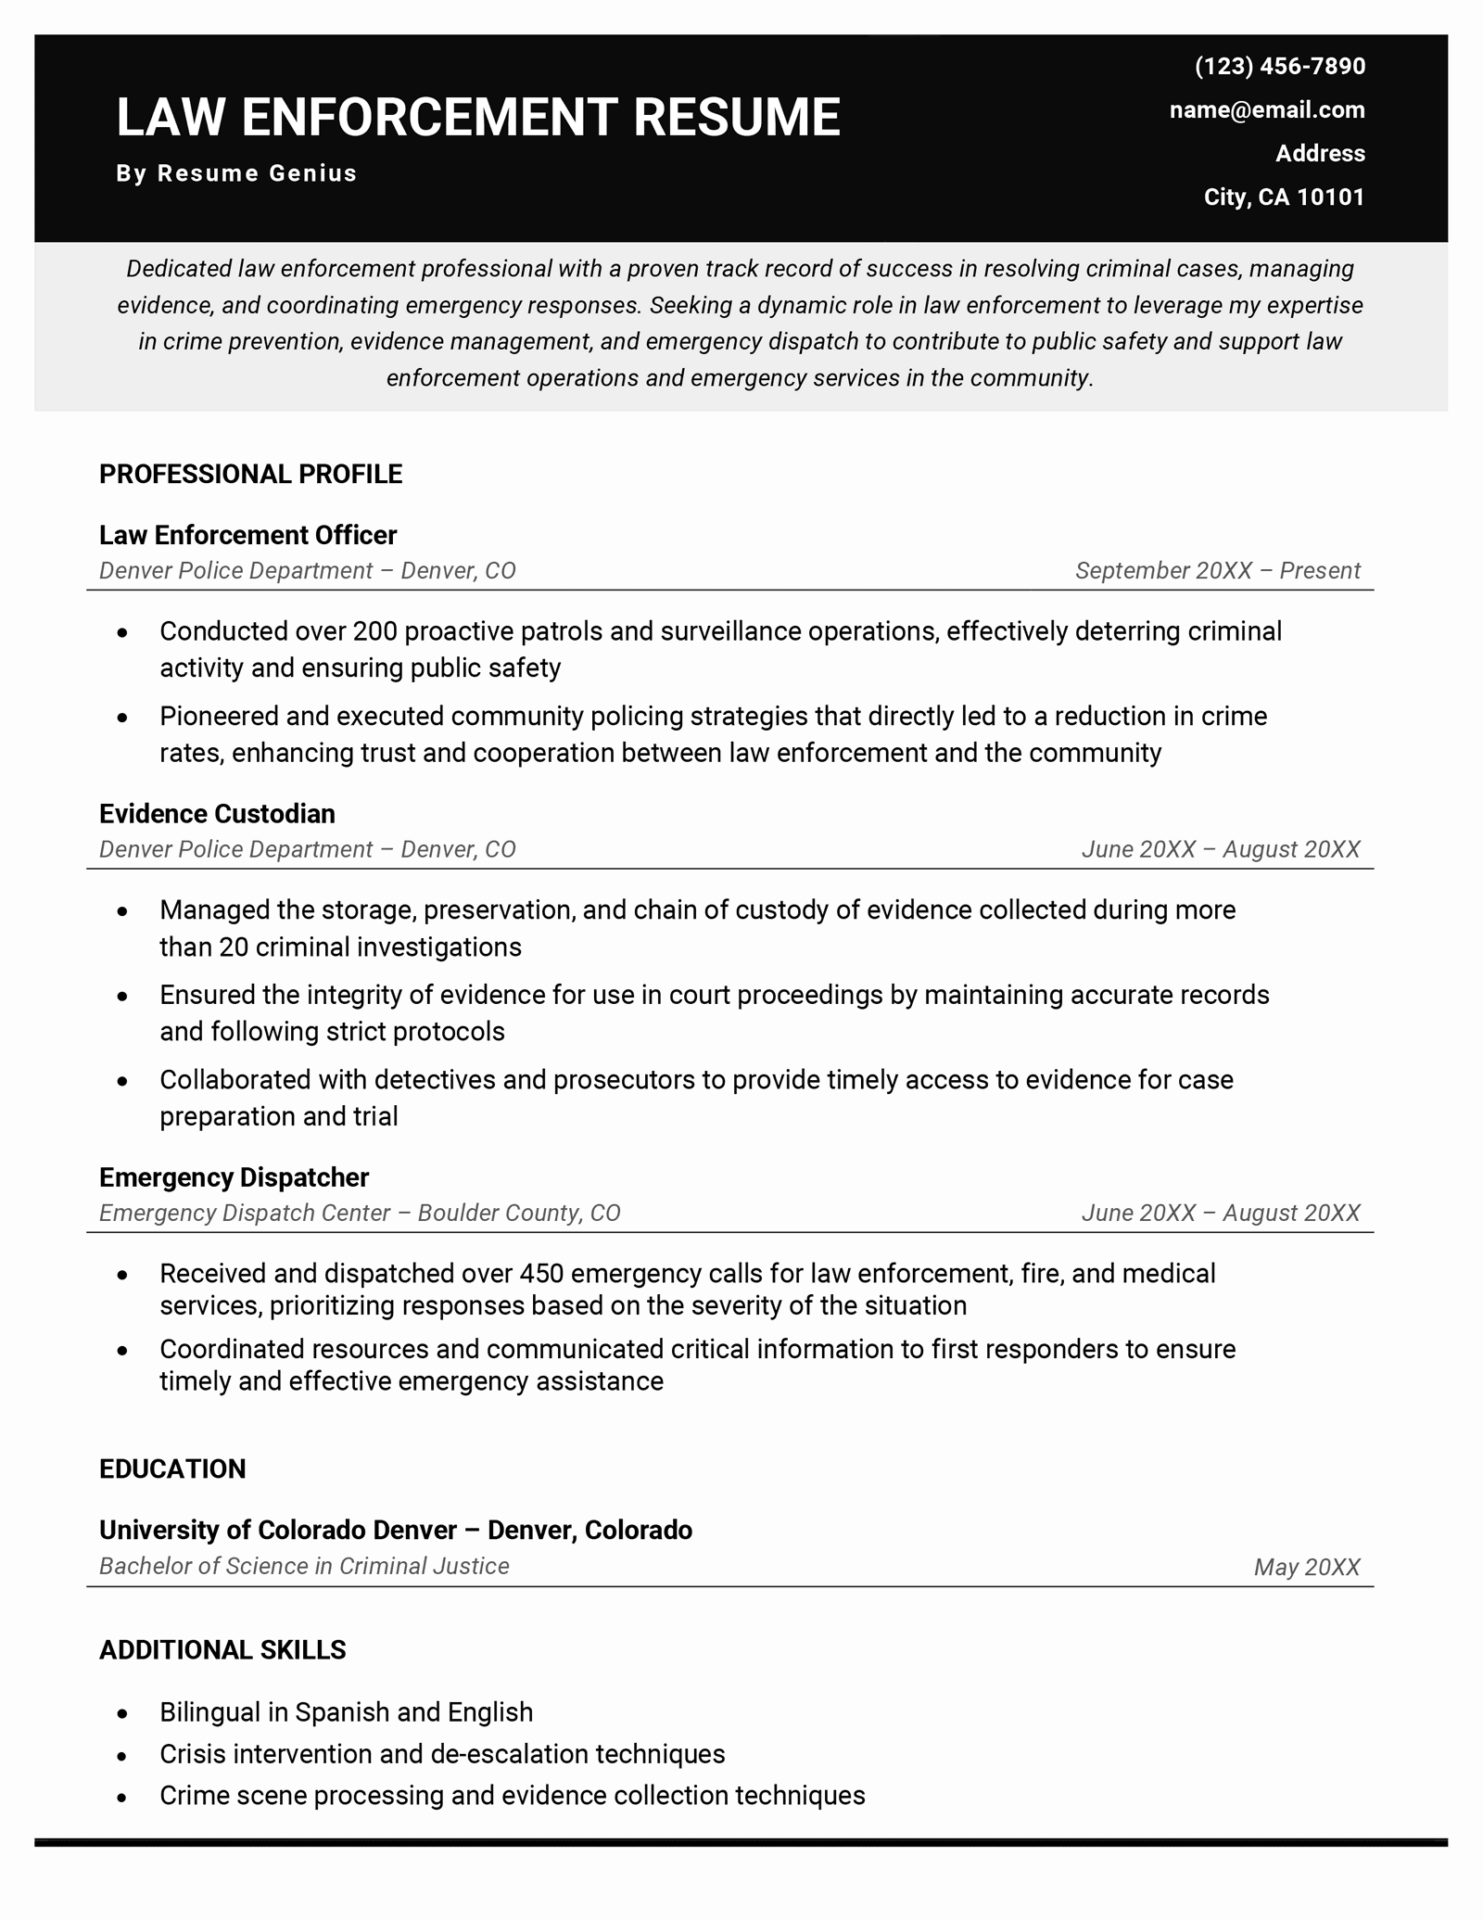 An example of a law enforcement resume using a clean black and white template. It effectively shows the candidate's objective, experience, education, and skills.